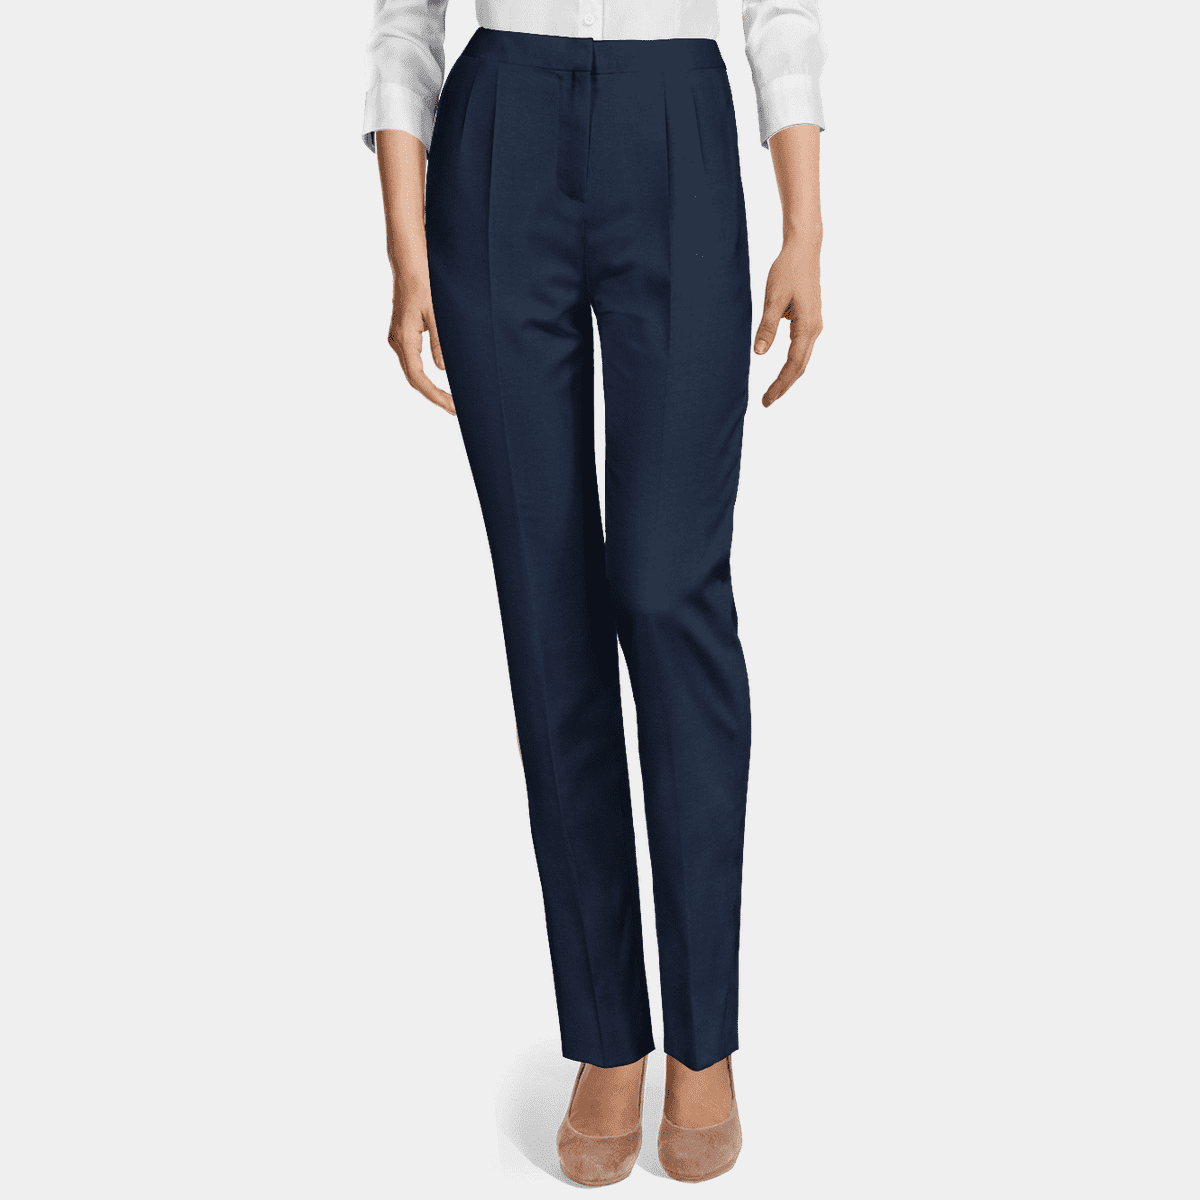 Buy Navy Trousers & Pants for Women by Sugathari Online